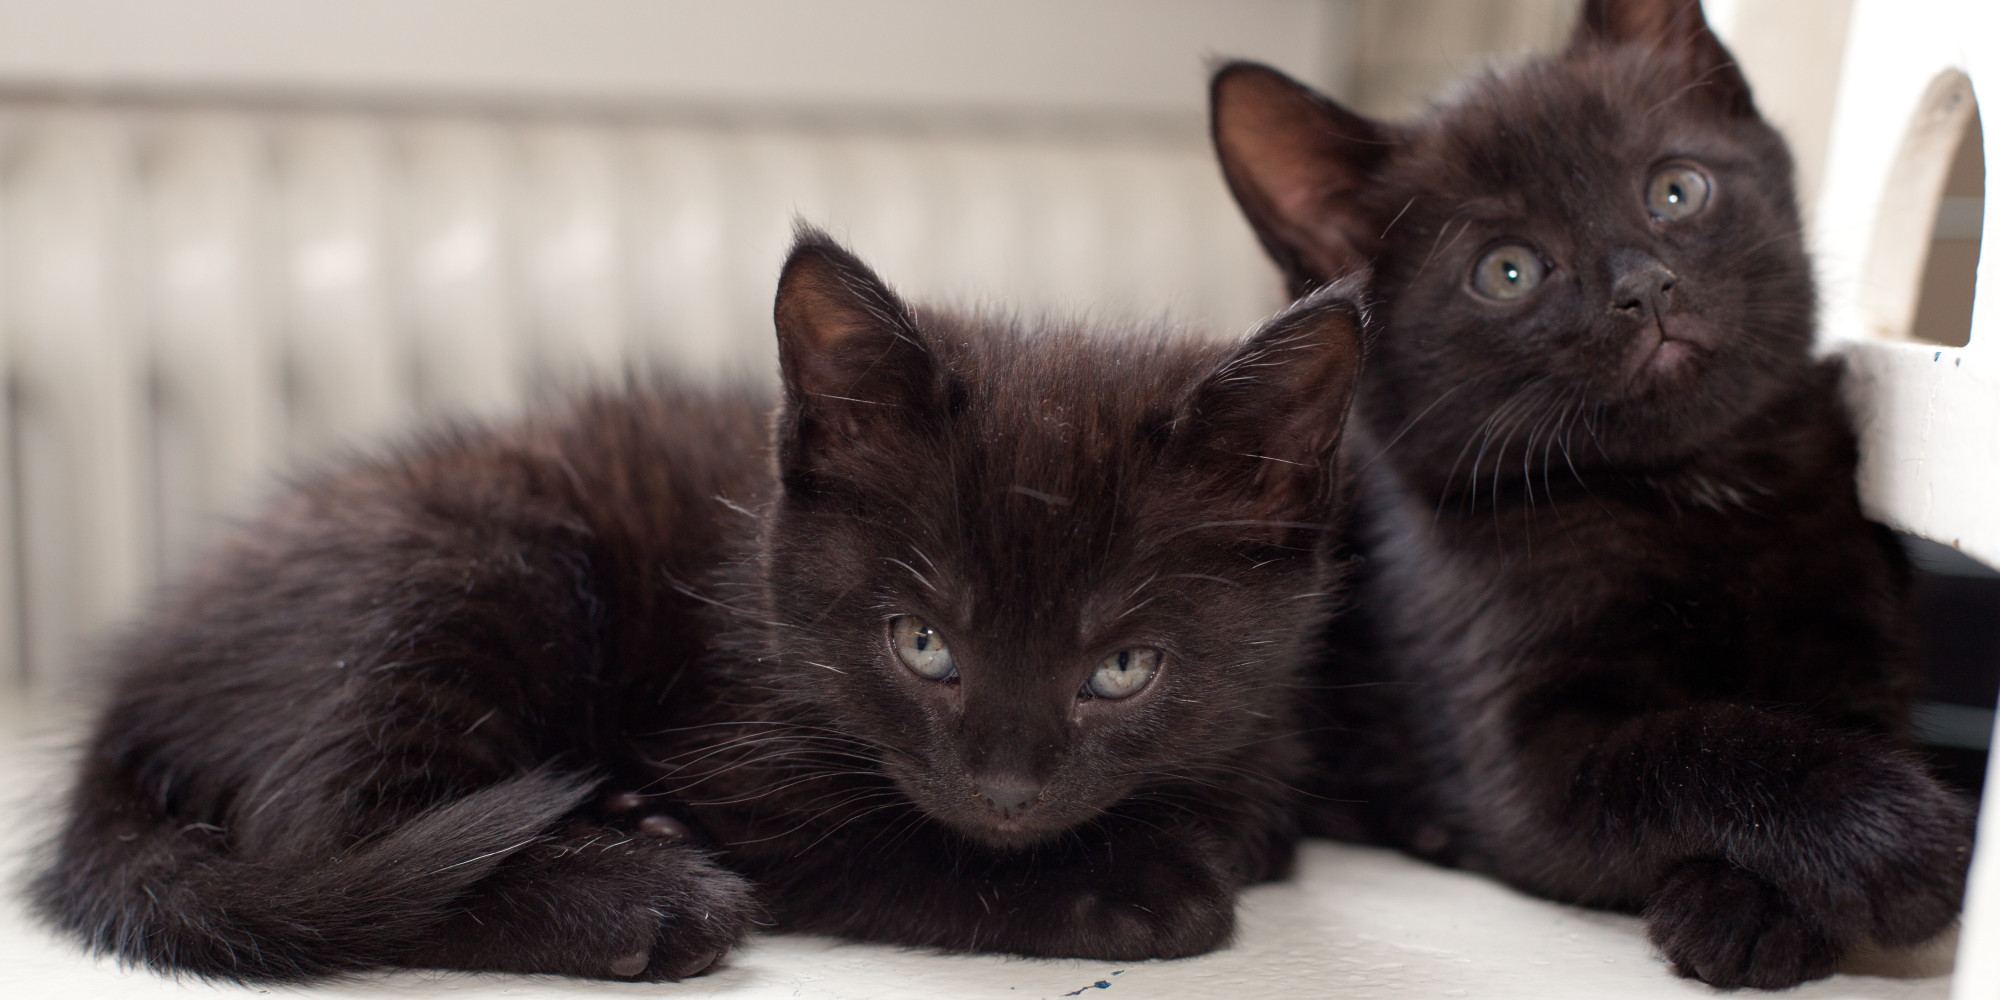 Black Cats Less Than Half As Likely To Be Adopted As Gray Cats ...